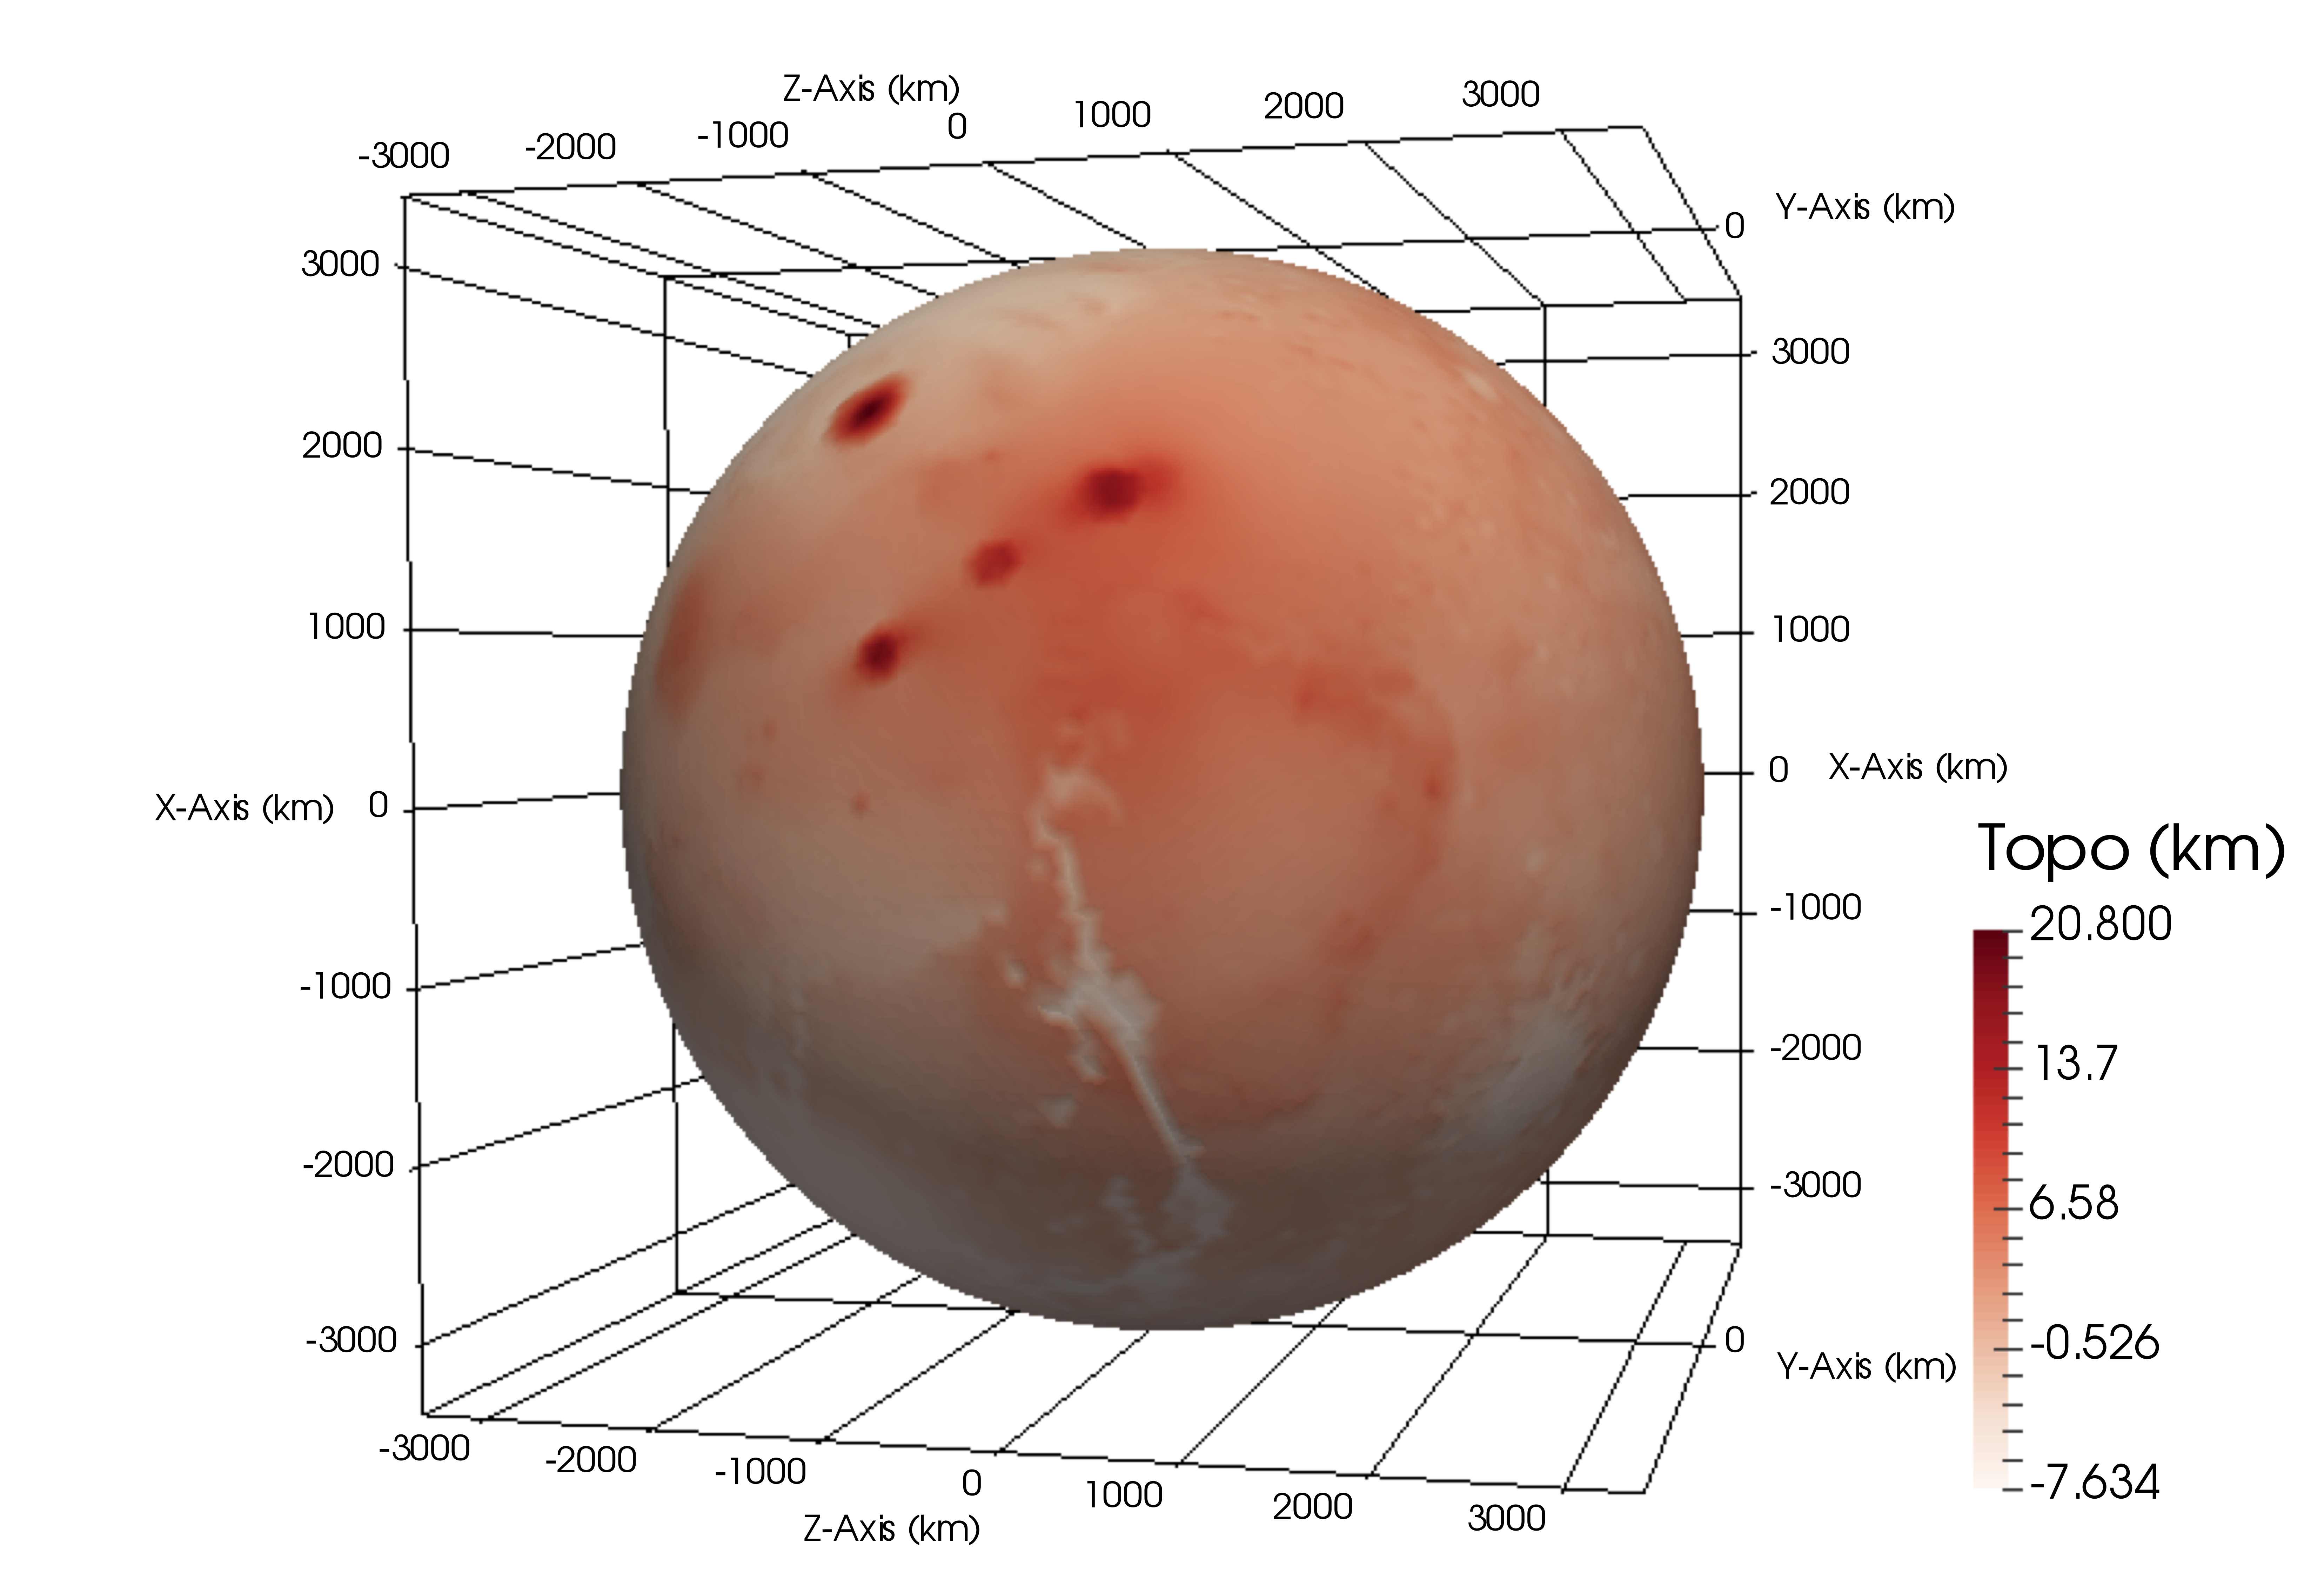 Mars_topo94k_axis.png